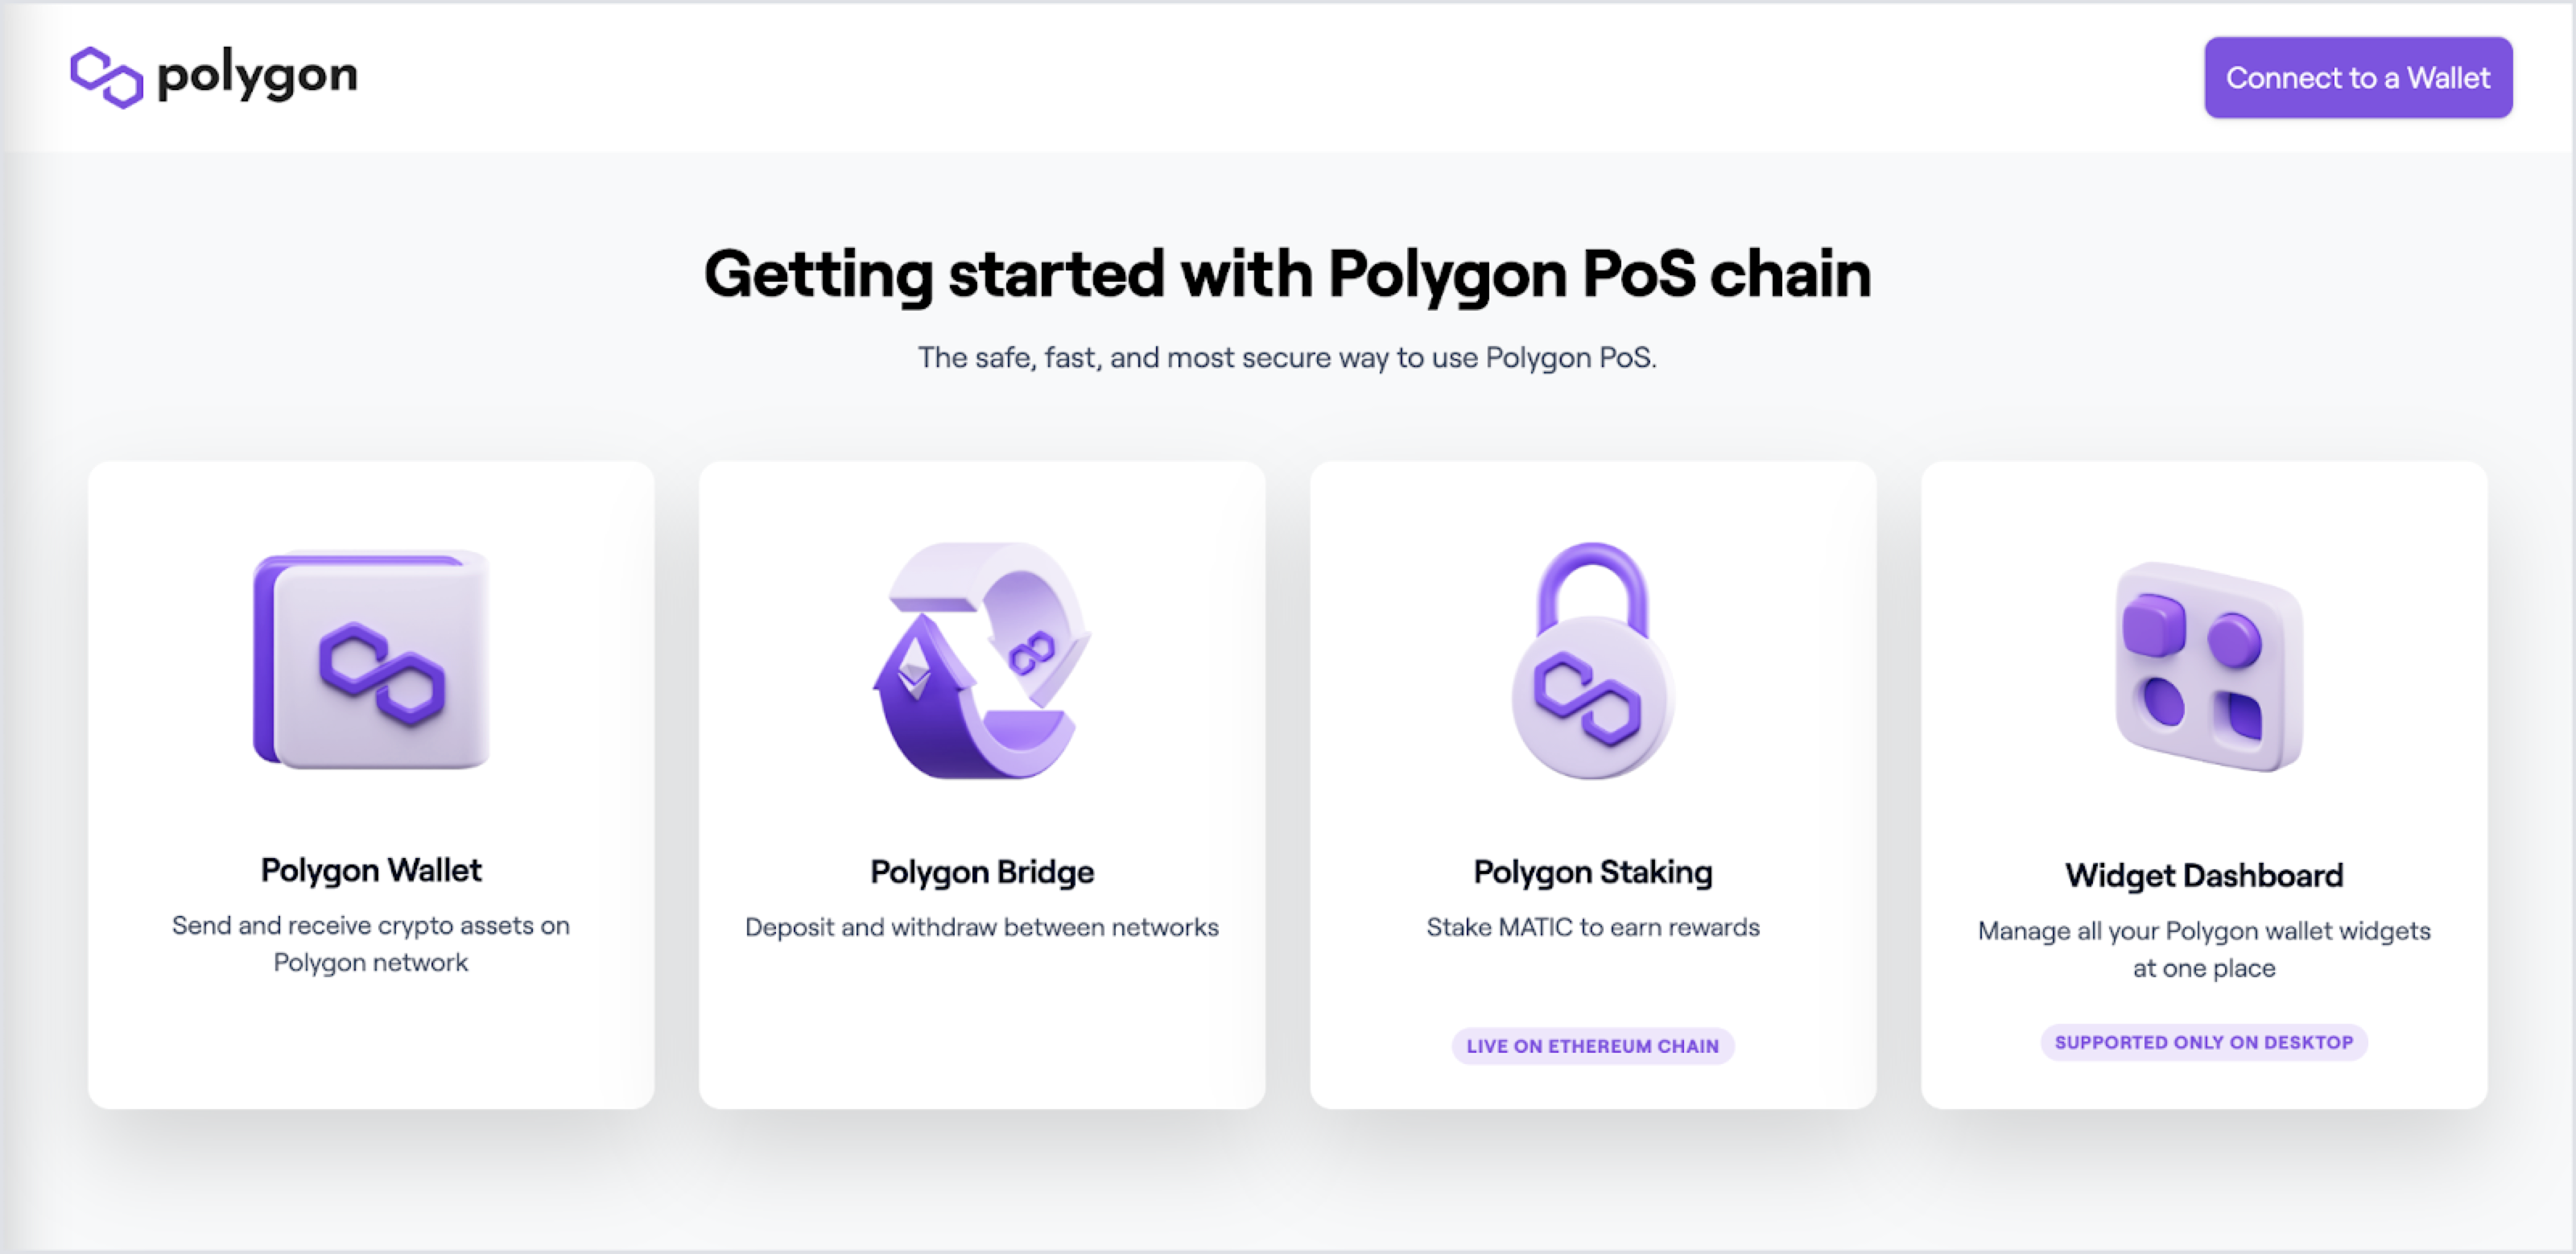 Select the Polygon Staking tile on the page, Getting started with Polygon PoS chain.